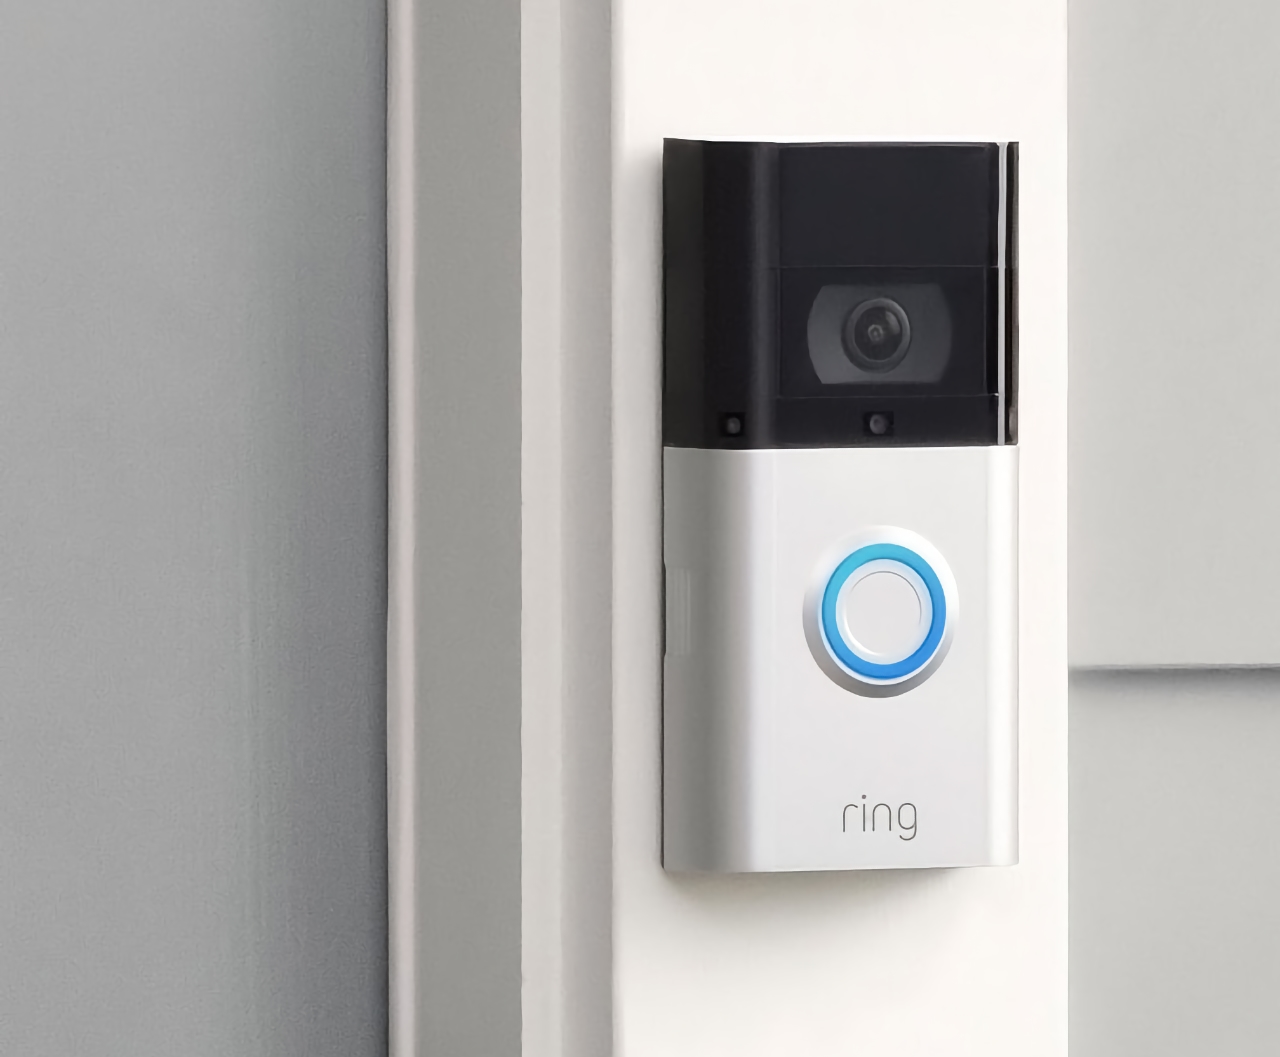 Smart Ring Video Doorbell 3 with FHD camera, 160-degree coverage angle and Alexa support is on sale on Amazon for $40 off